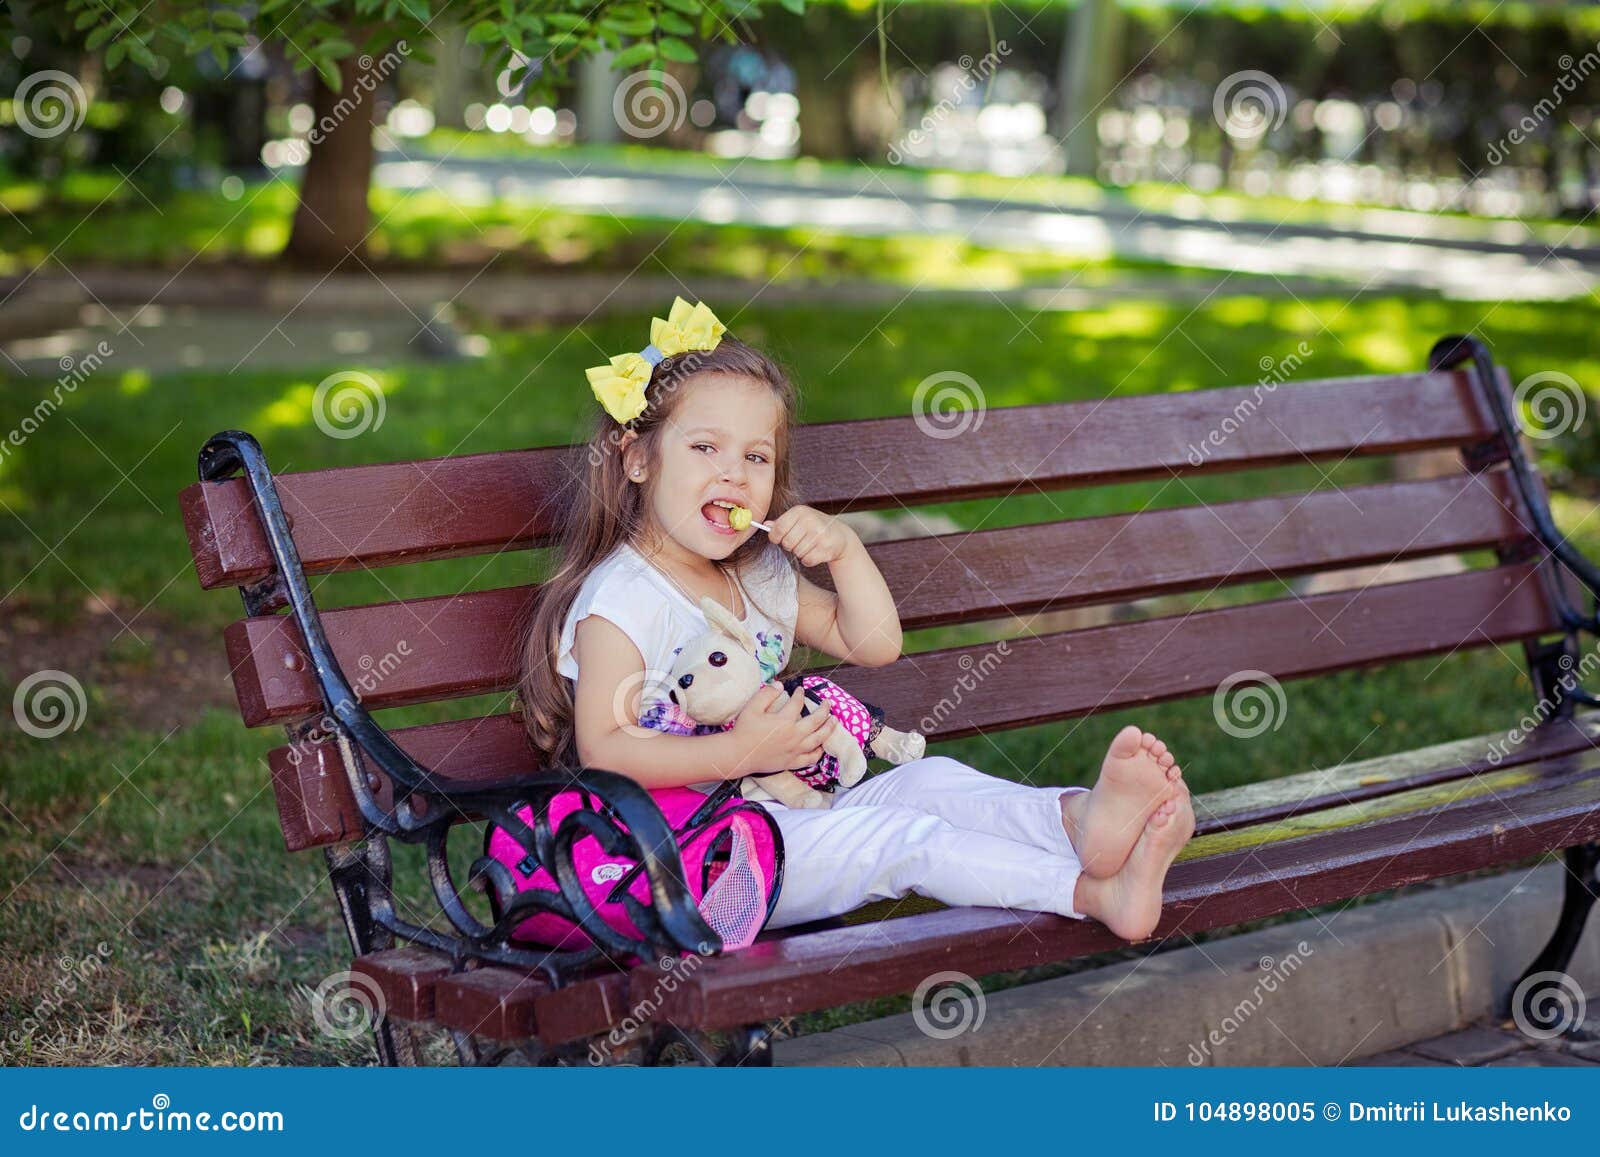 cute musical baby child girl with brunette hairs and stylish wear enjoying life sitting on wooden chair bench in summer awesome pa